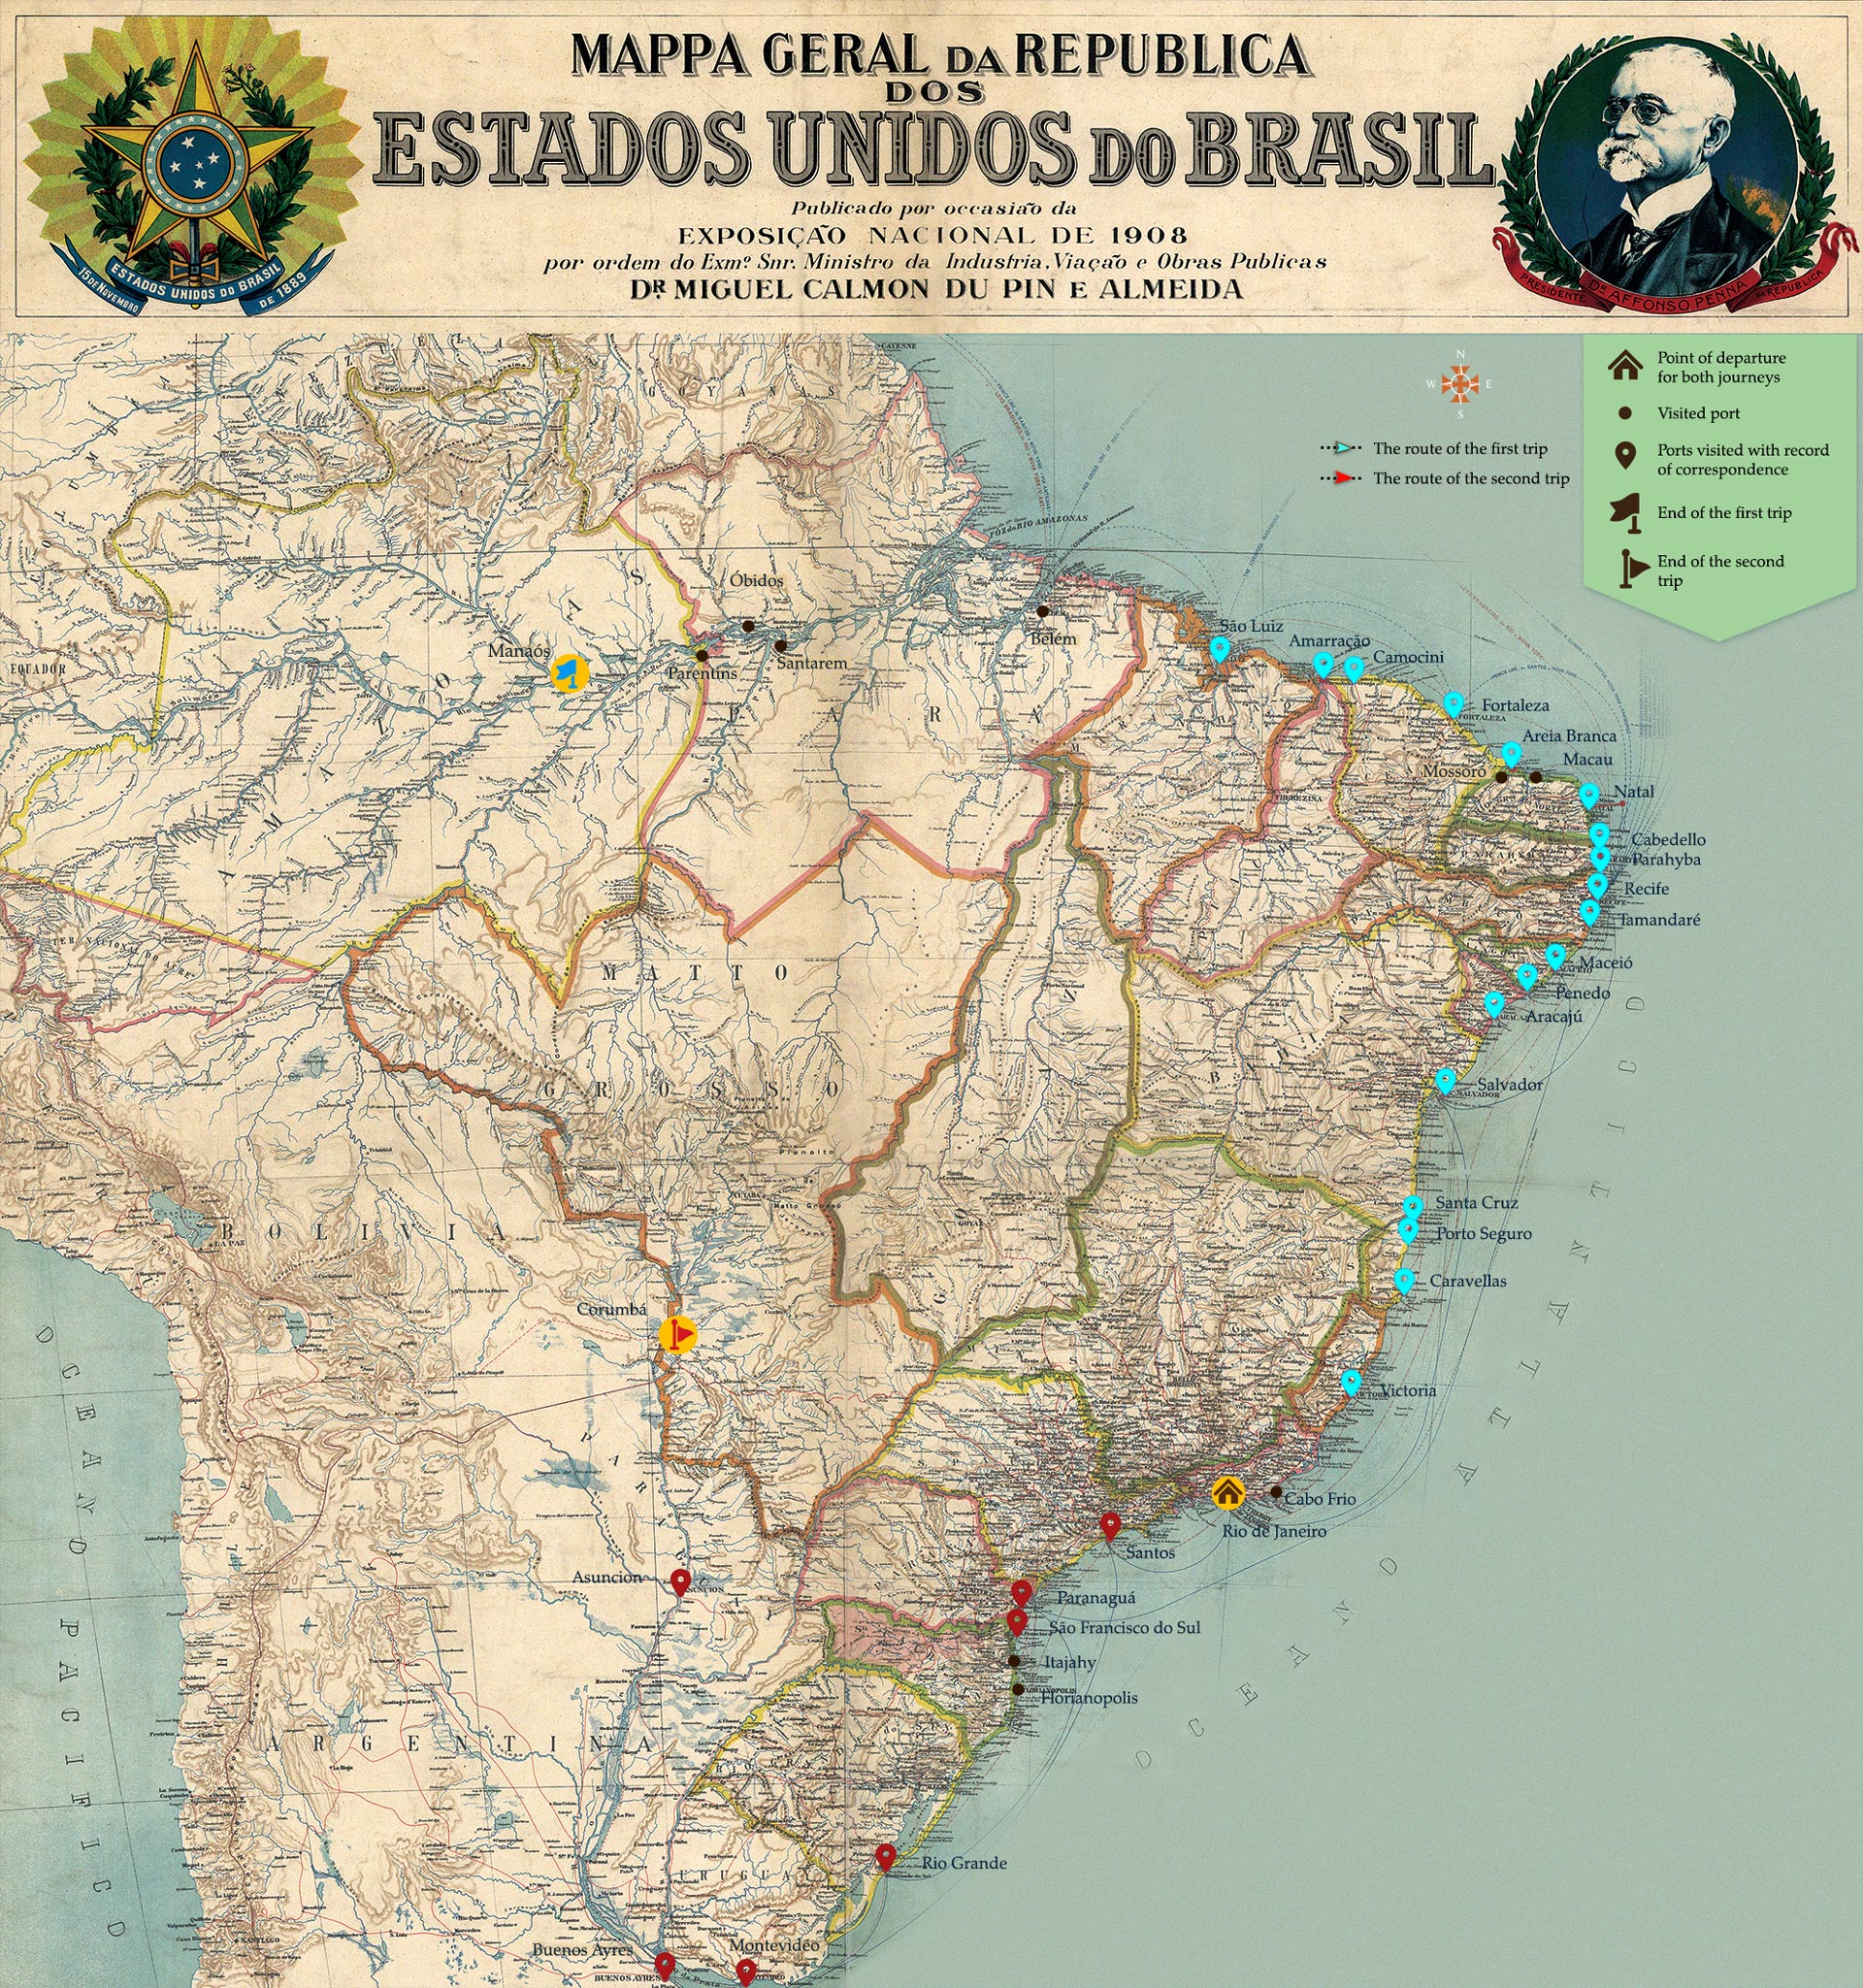 General Map of the Republic of the United States of Brazil published for the National Exposition of 1908 by order of the right honorable Minister of Industry, Transport and Public Works, Doctor Miguel Calmon Du Pin e Almeida